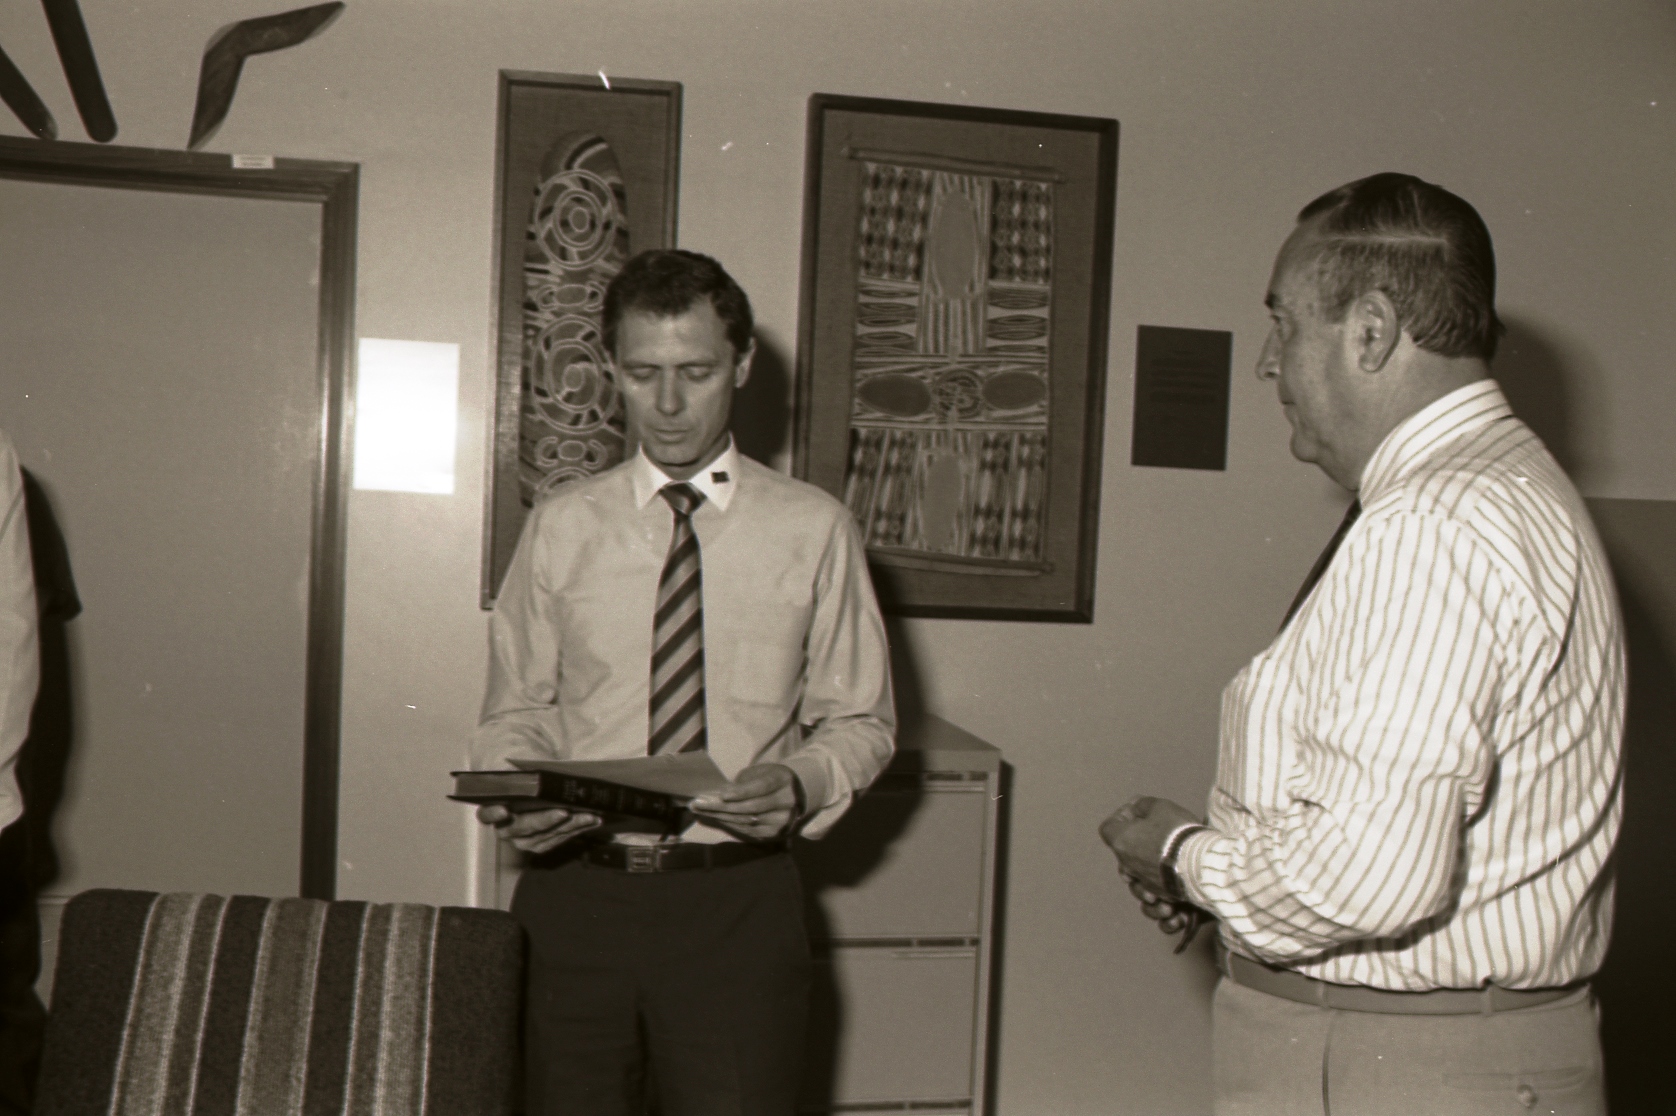 [Swearing in of Chief Minister Perron, 14 July 1988] Image courtesy of Northern Territory Archives Service, Department of the Chief Minister, NTRS 3823 P1, BW 2735, Item 1